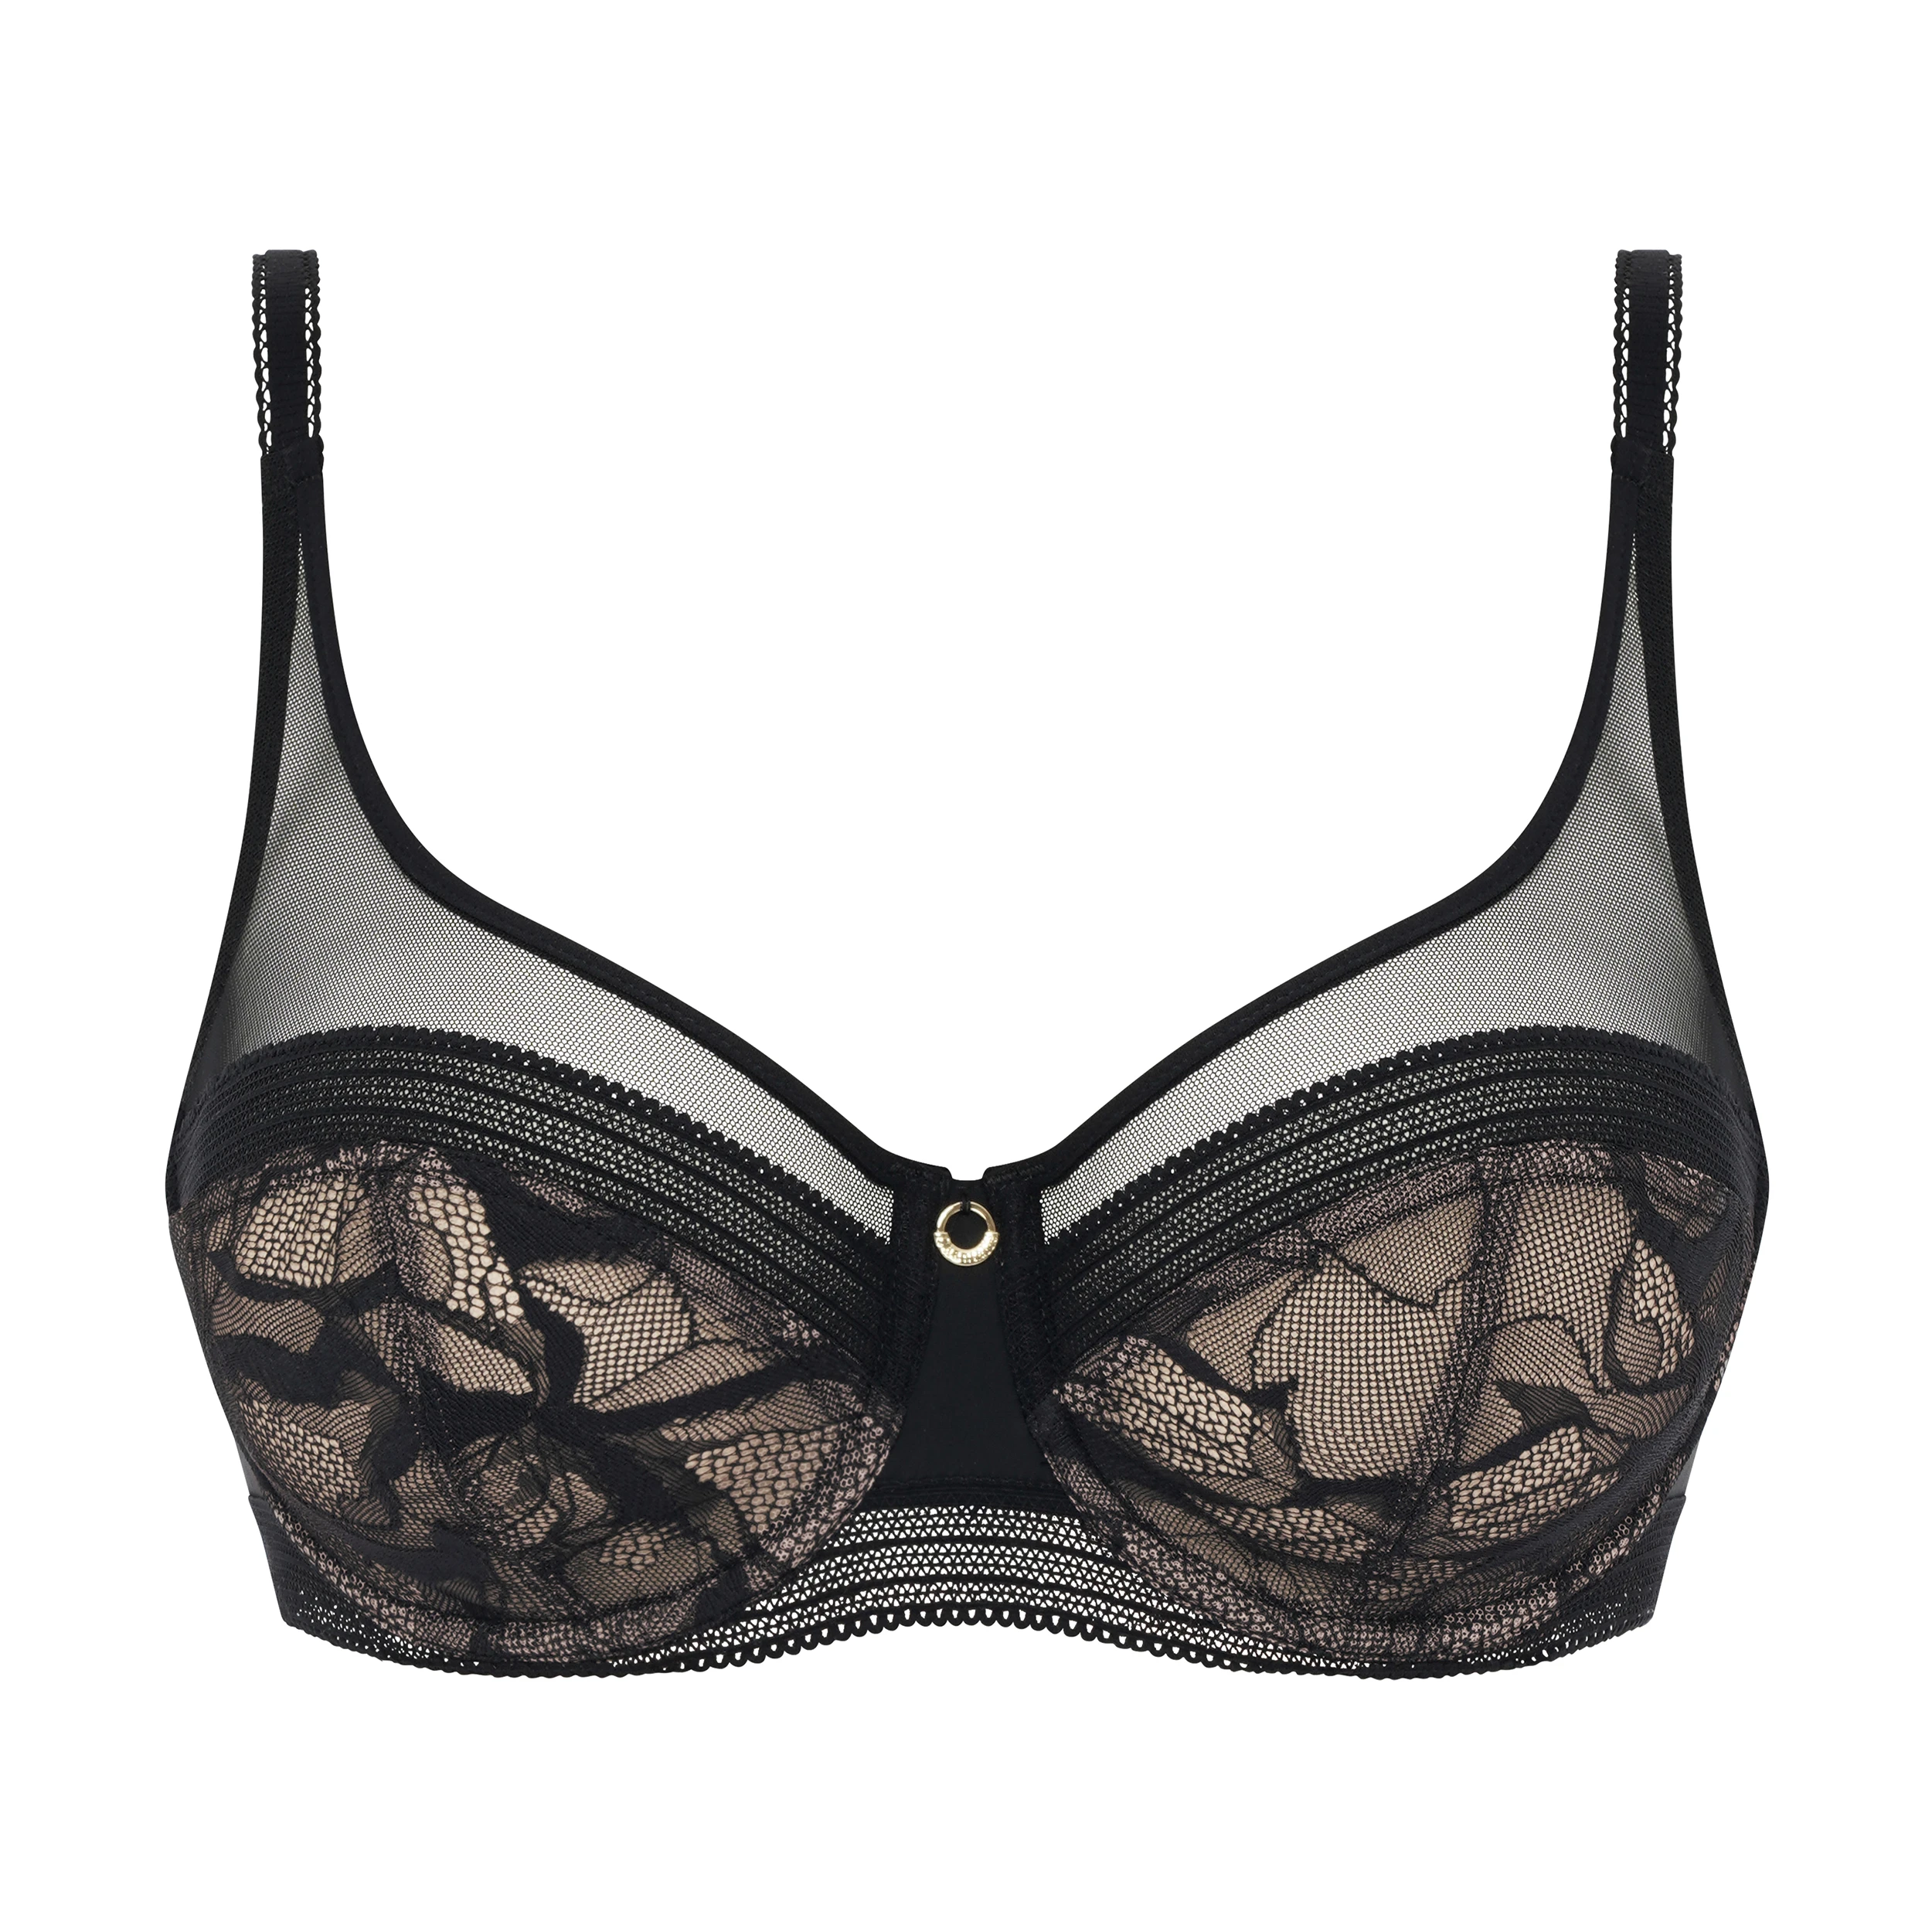 Chantelle True Lace Full Cup Covering Underwire Bra- Milk (Style: 11M10)